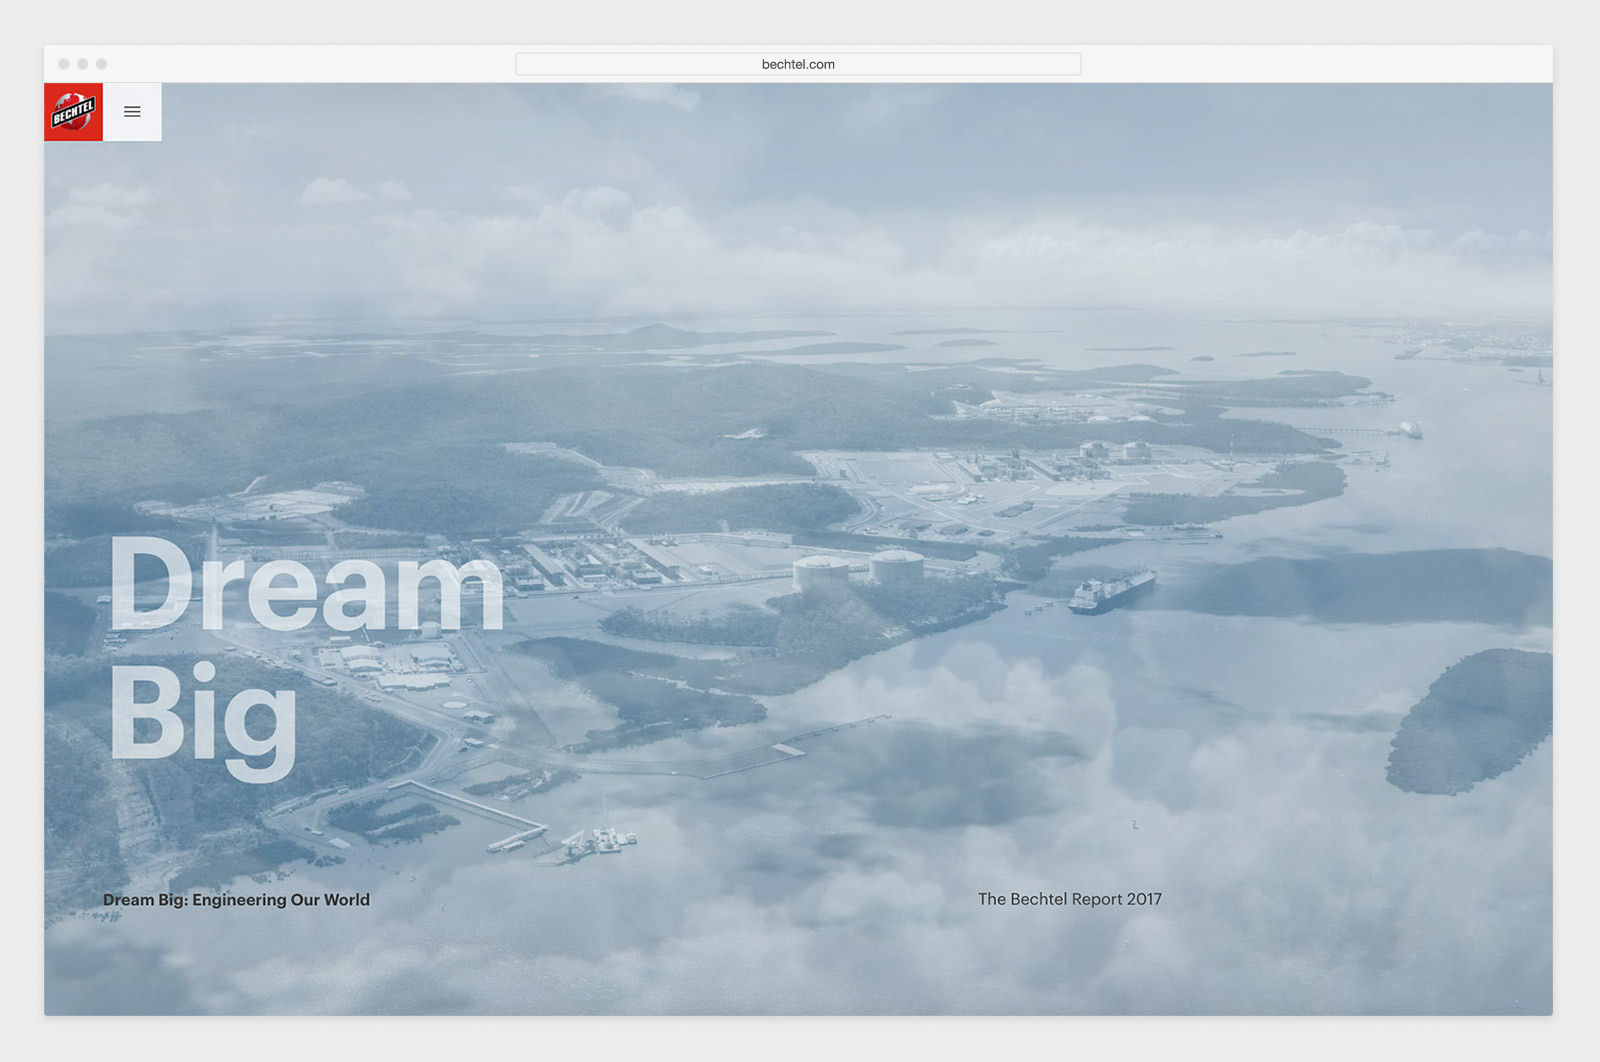 Landing page for the interactive digital 2017 Bechtel annual report design, which reads "Dream Big" with moving clouds